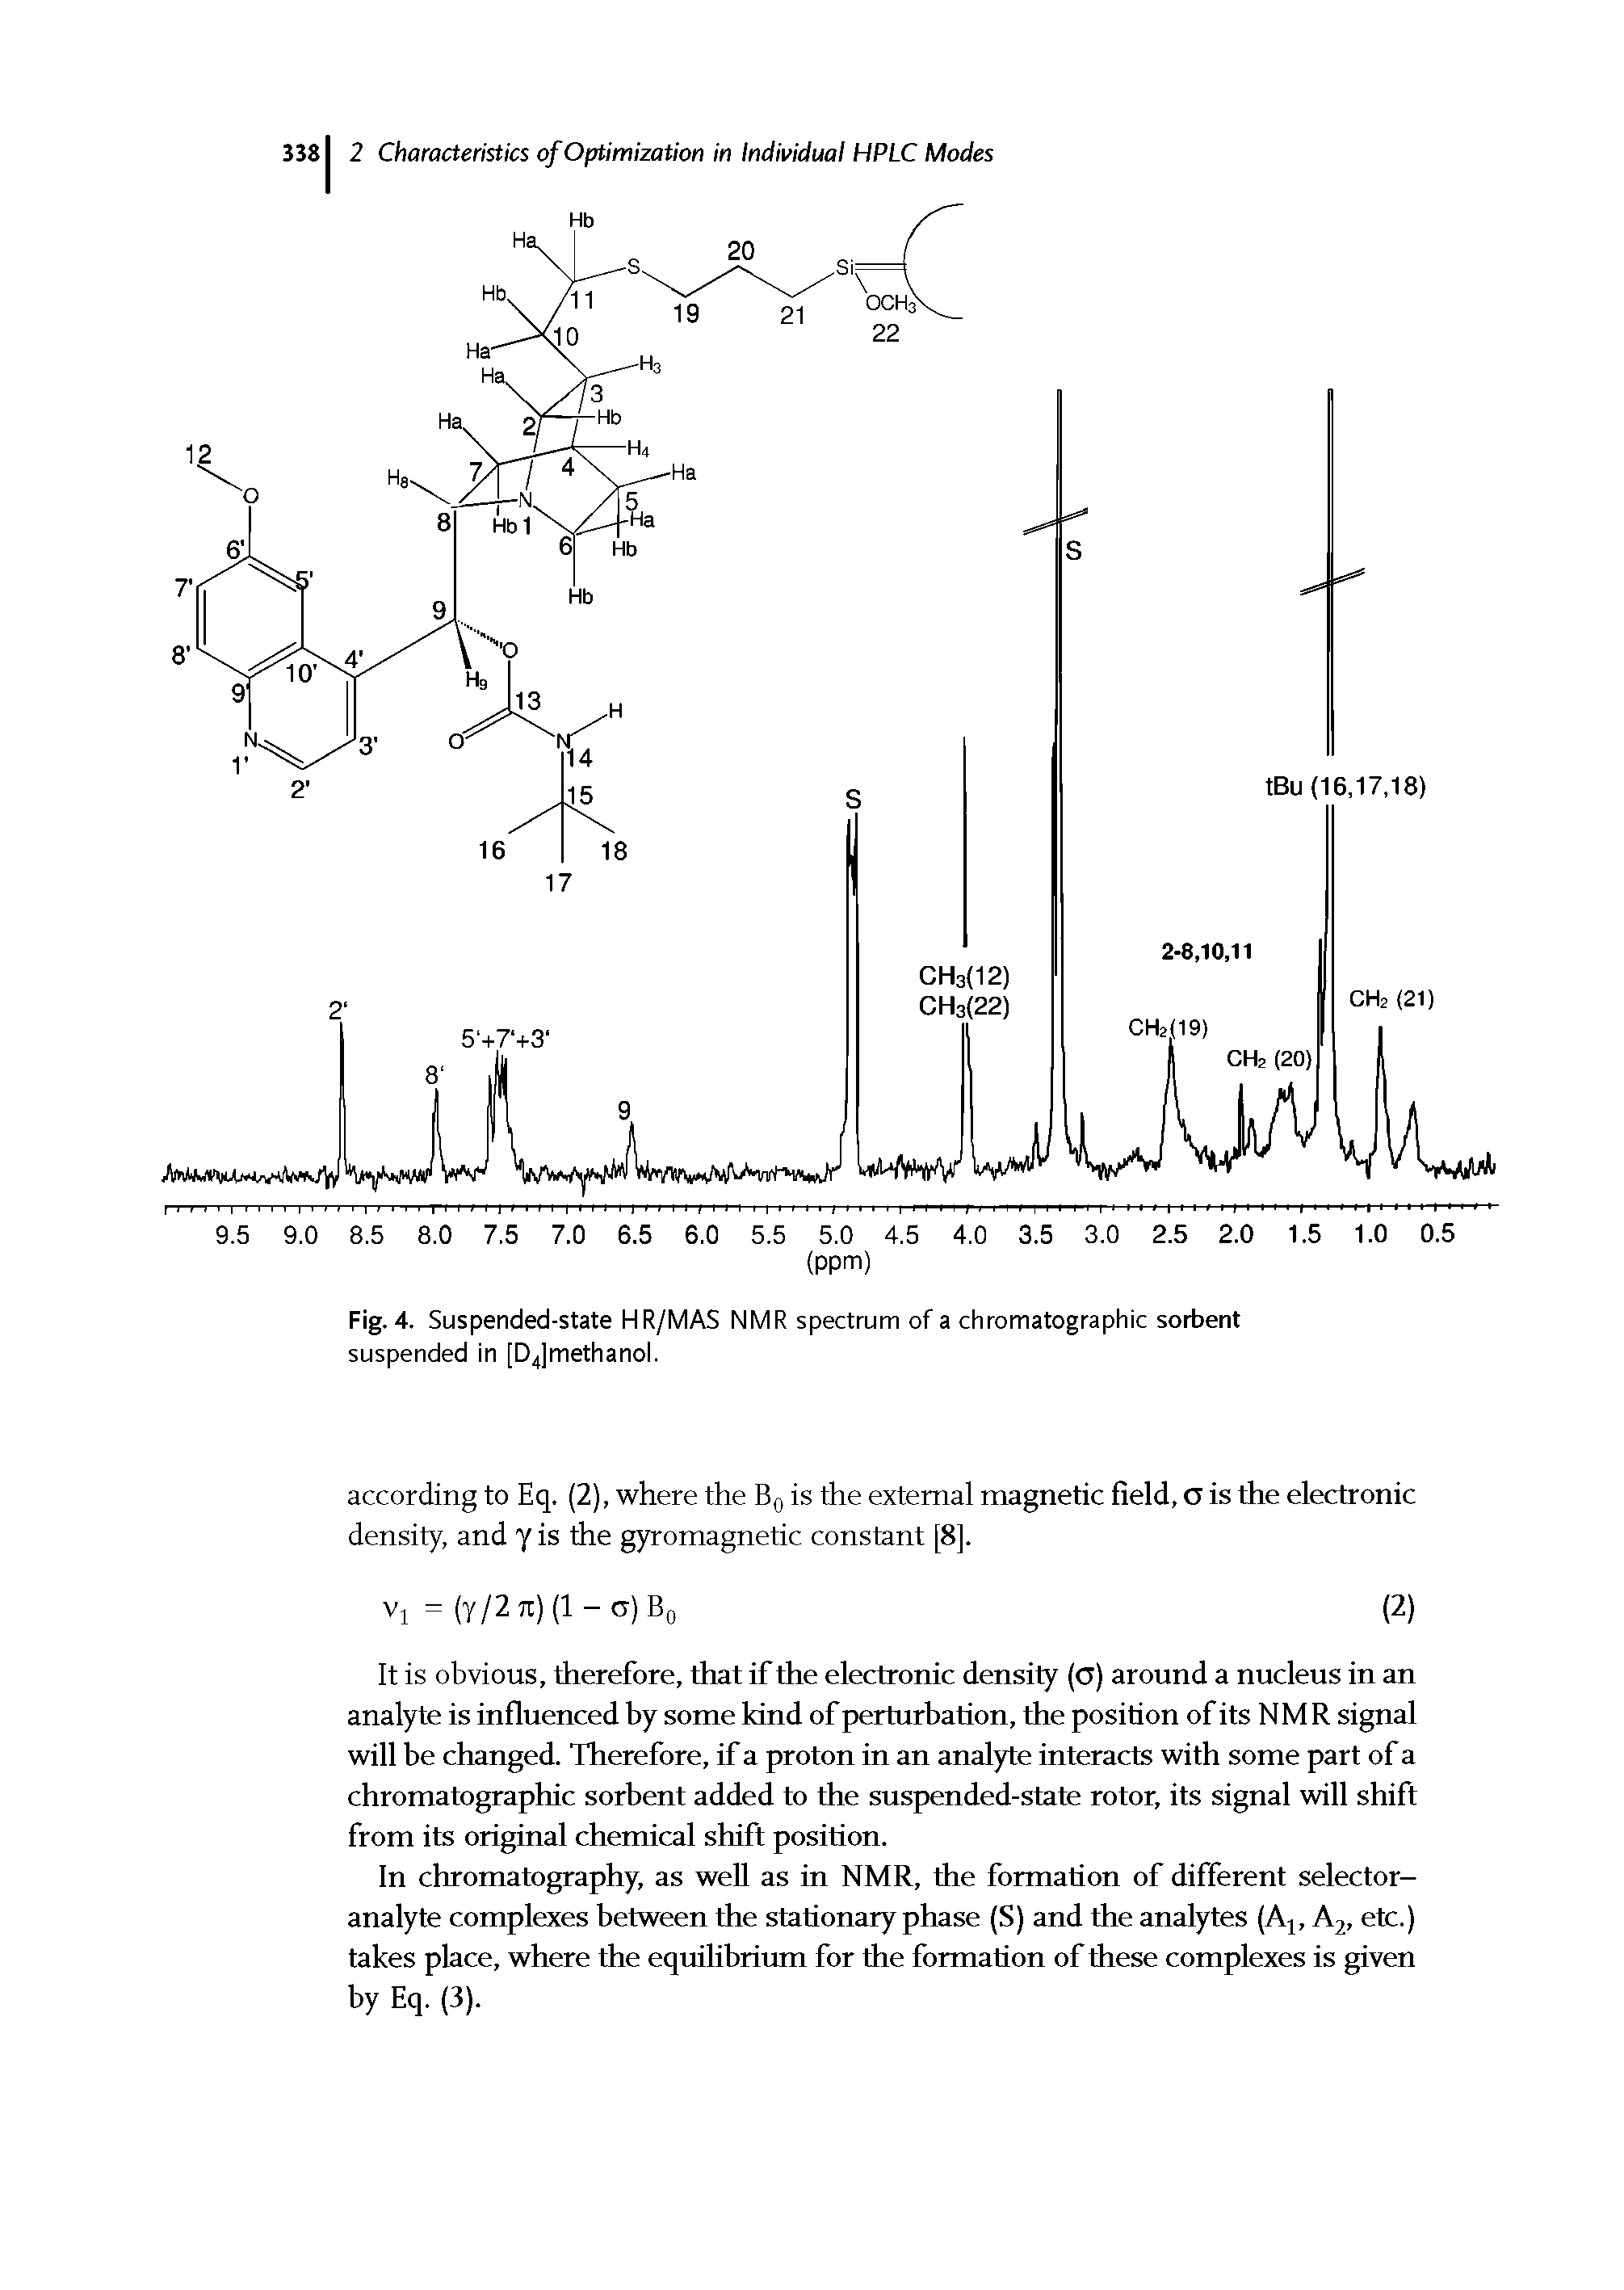 Fig. 4. Suspended-state HR/MAS NMR spectrum of a chromatographic sorbent suspended in [DJmethanol.